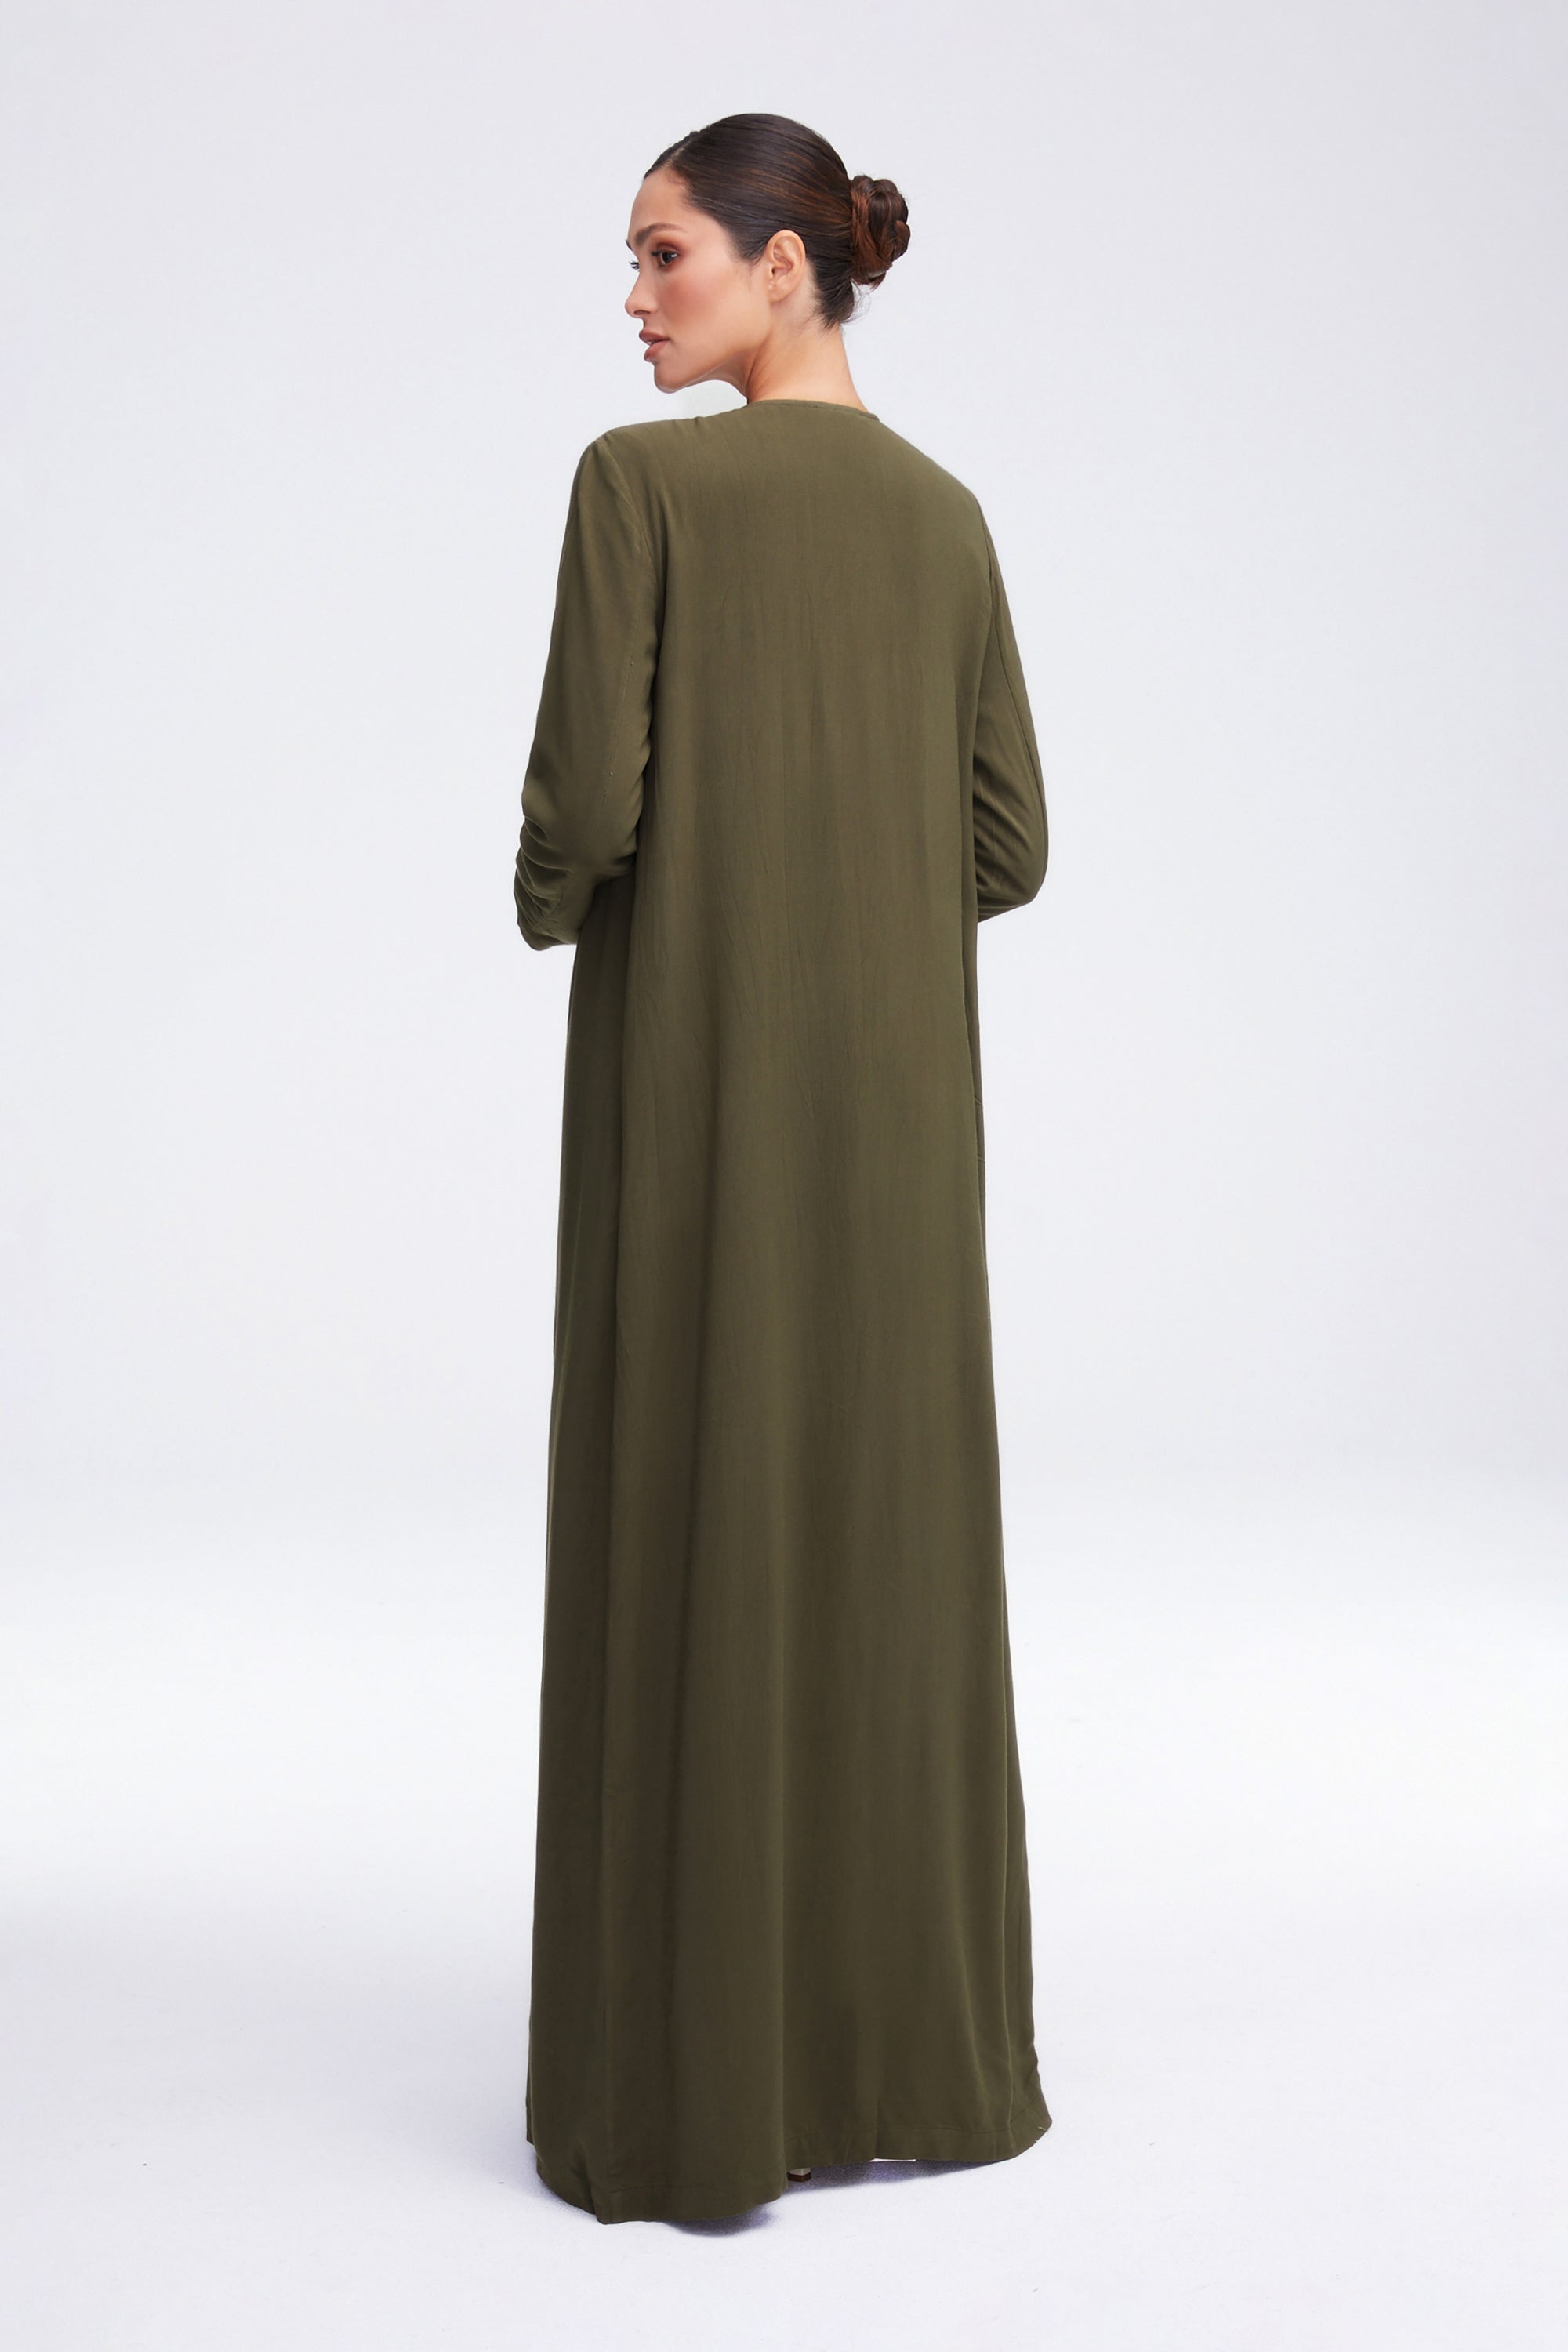 Essential Woven Open Abaya - Olive Clothing epschoolboard 